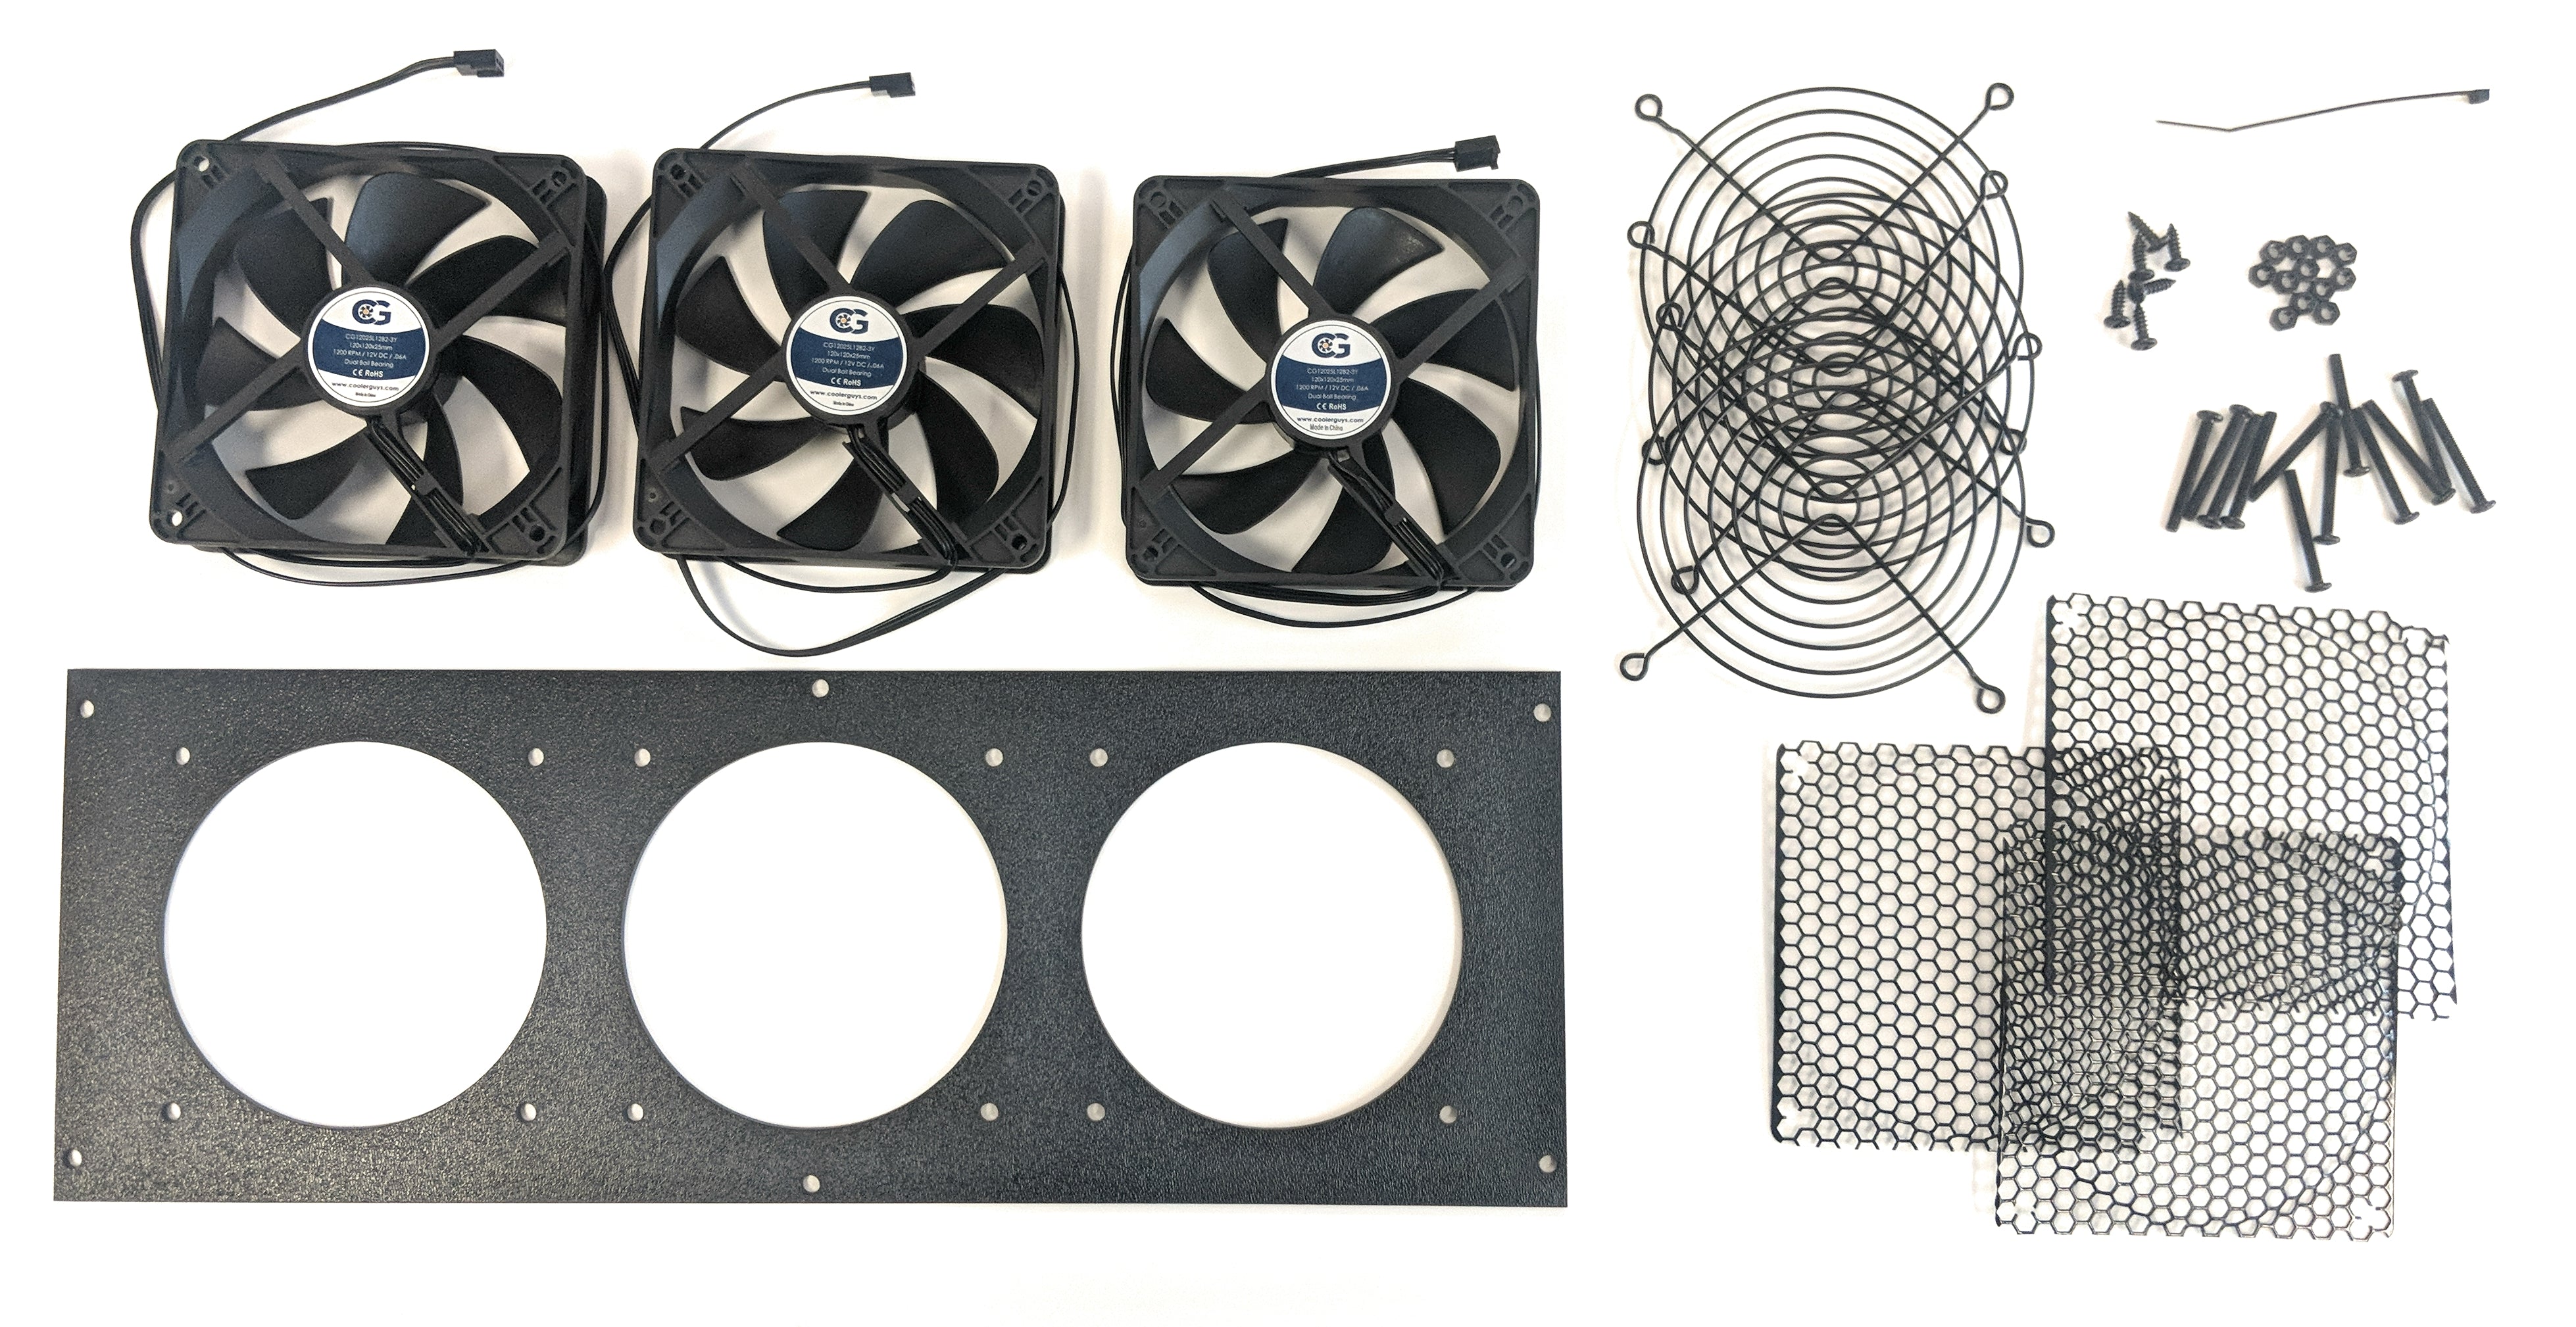 Shop for Coolerguys Triple Kit with Fan Online